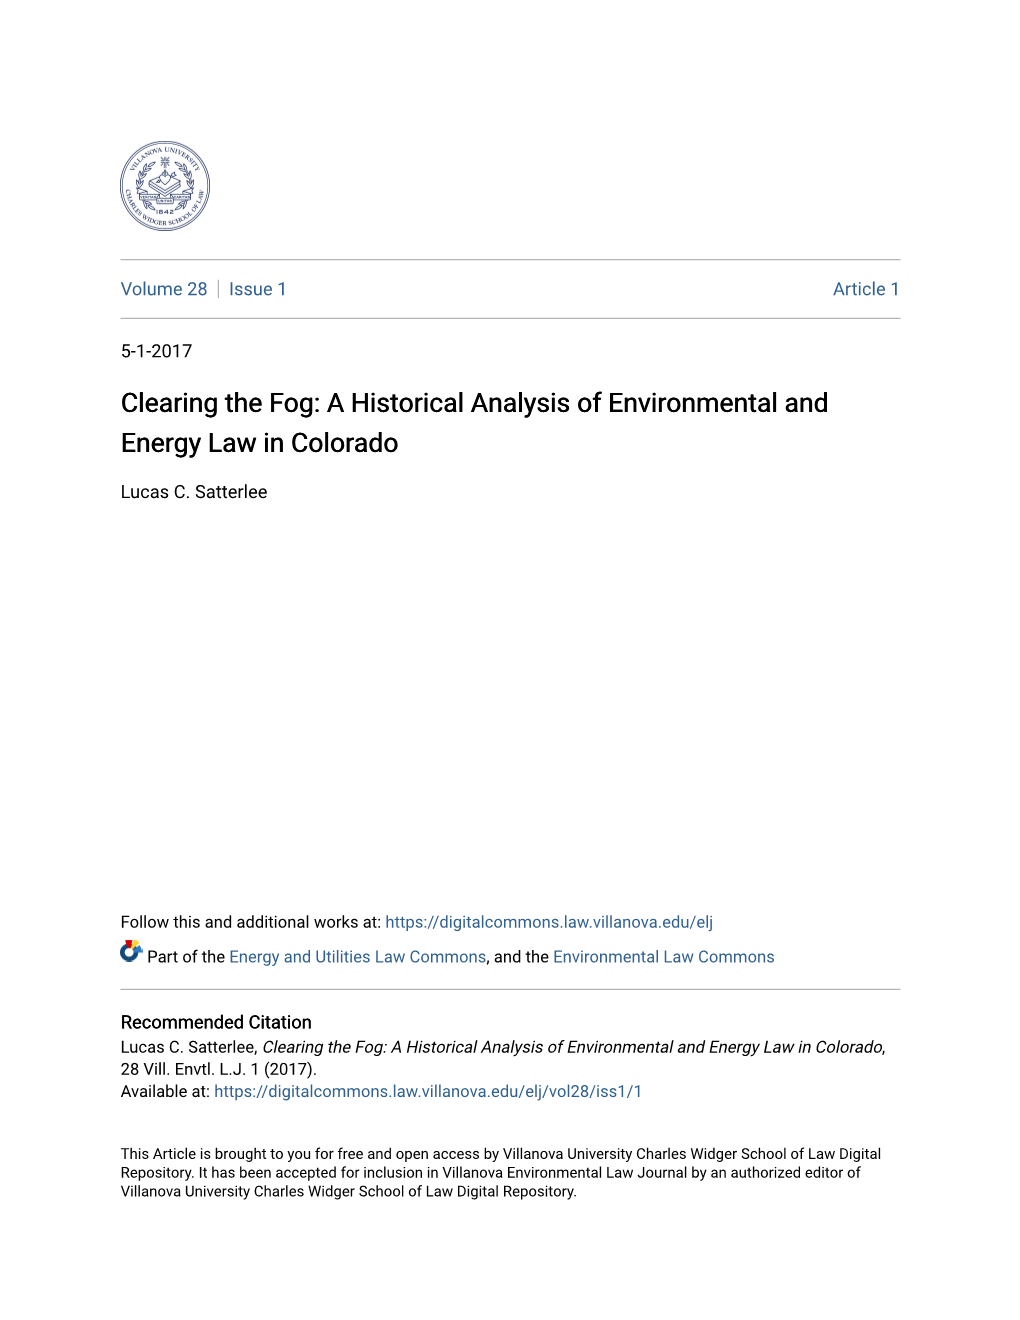 A Historical Analysis of Environmental and Energy Law in Colorado